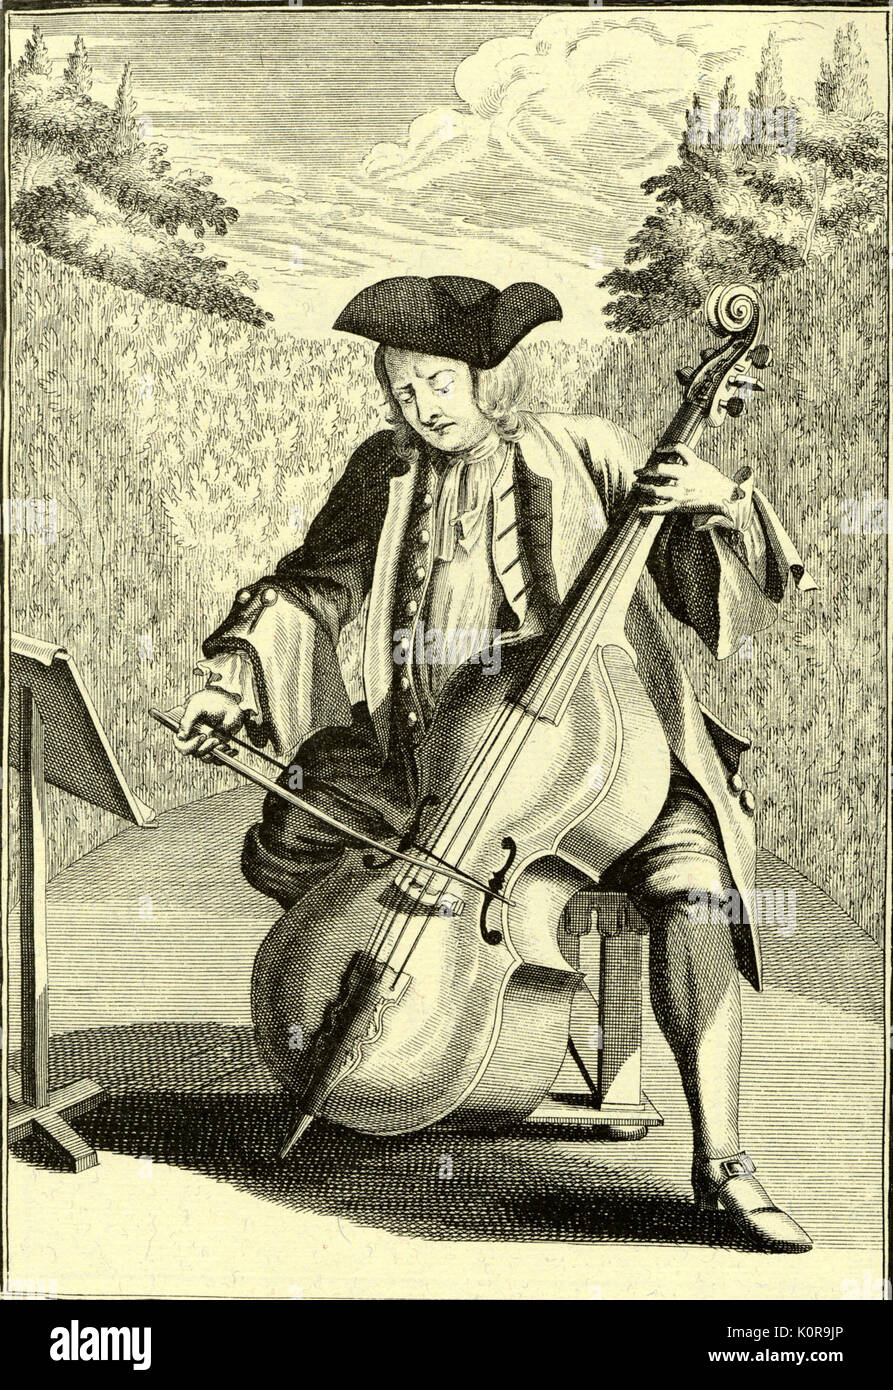 Man playing cello. Engraving by J. C. Weigel (1661-1726) from 'Musicalisches Theatrum'. Late 17th century/ early 17th century. Stock Photo